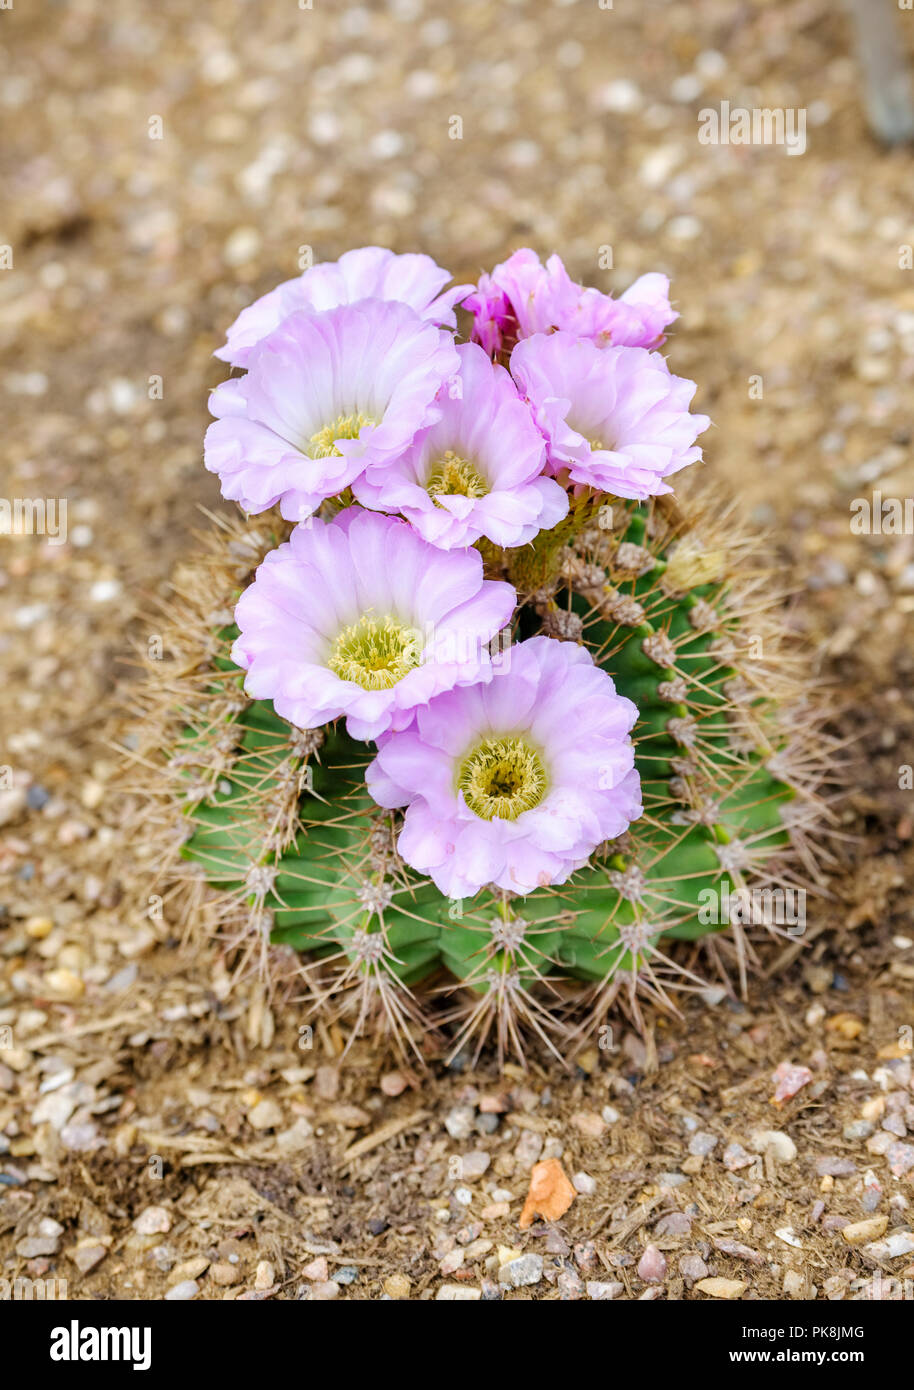 Close-up of Acanthocalycium spiniflorum, also known as Echinopsis spiniflora, in flower Stock Photo